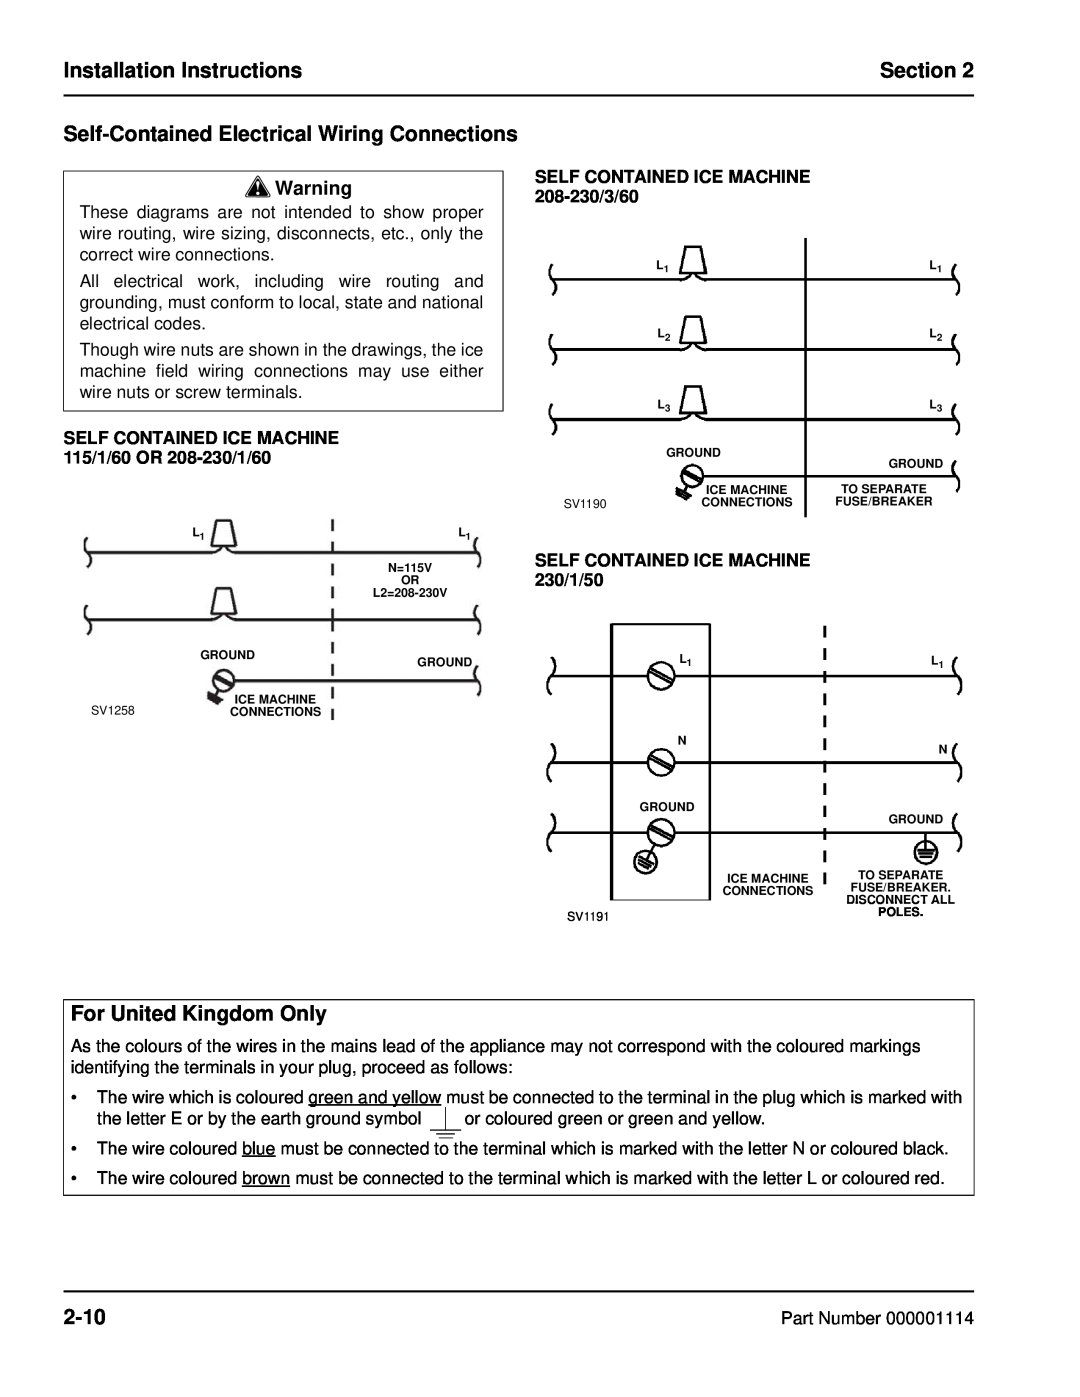 Manitowoc Ice Q Self-ContainedElectrical Wiring Connections, For United Kingdom Only, 2-10, Installation Instructions 